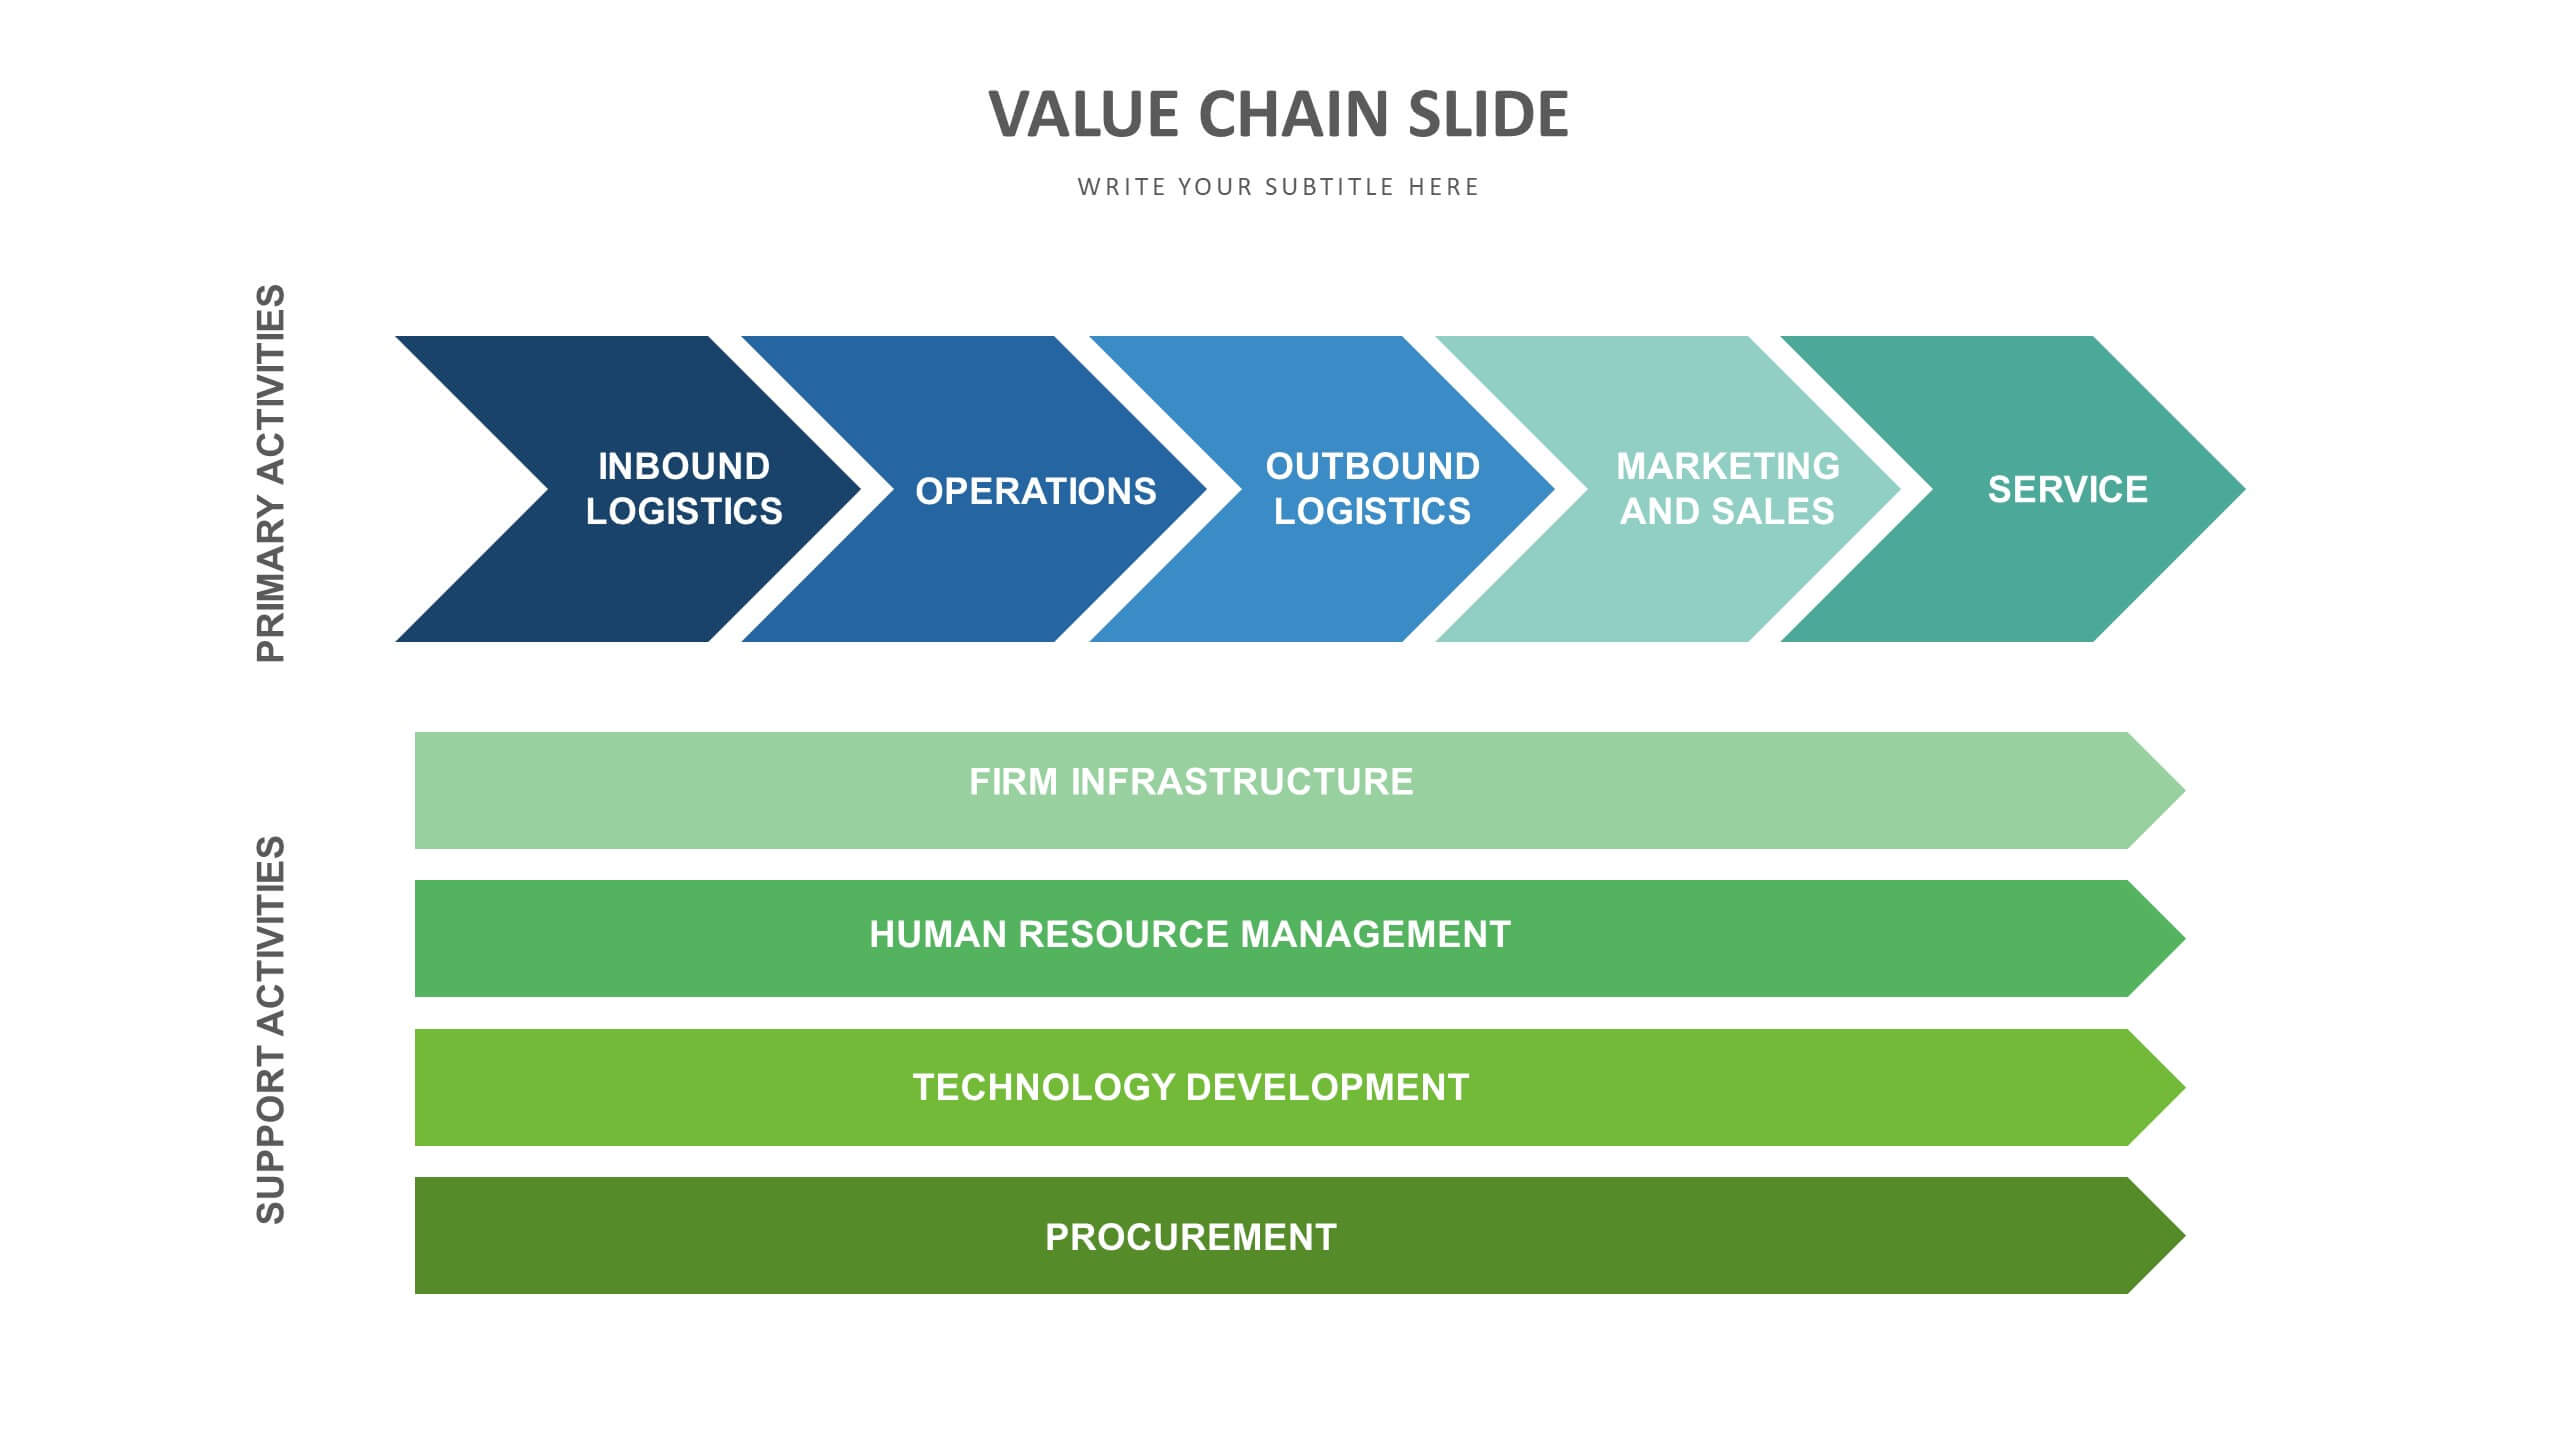 Site value. Value Chain. Value Chain Mapping. Service value Chain. Value Chain Analysis Template.